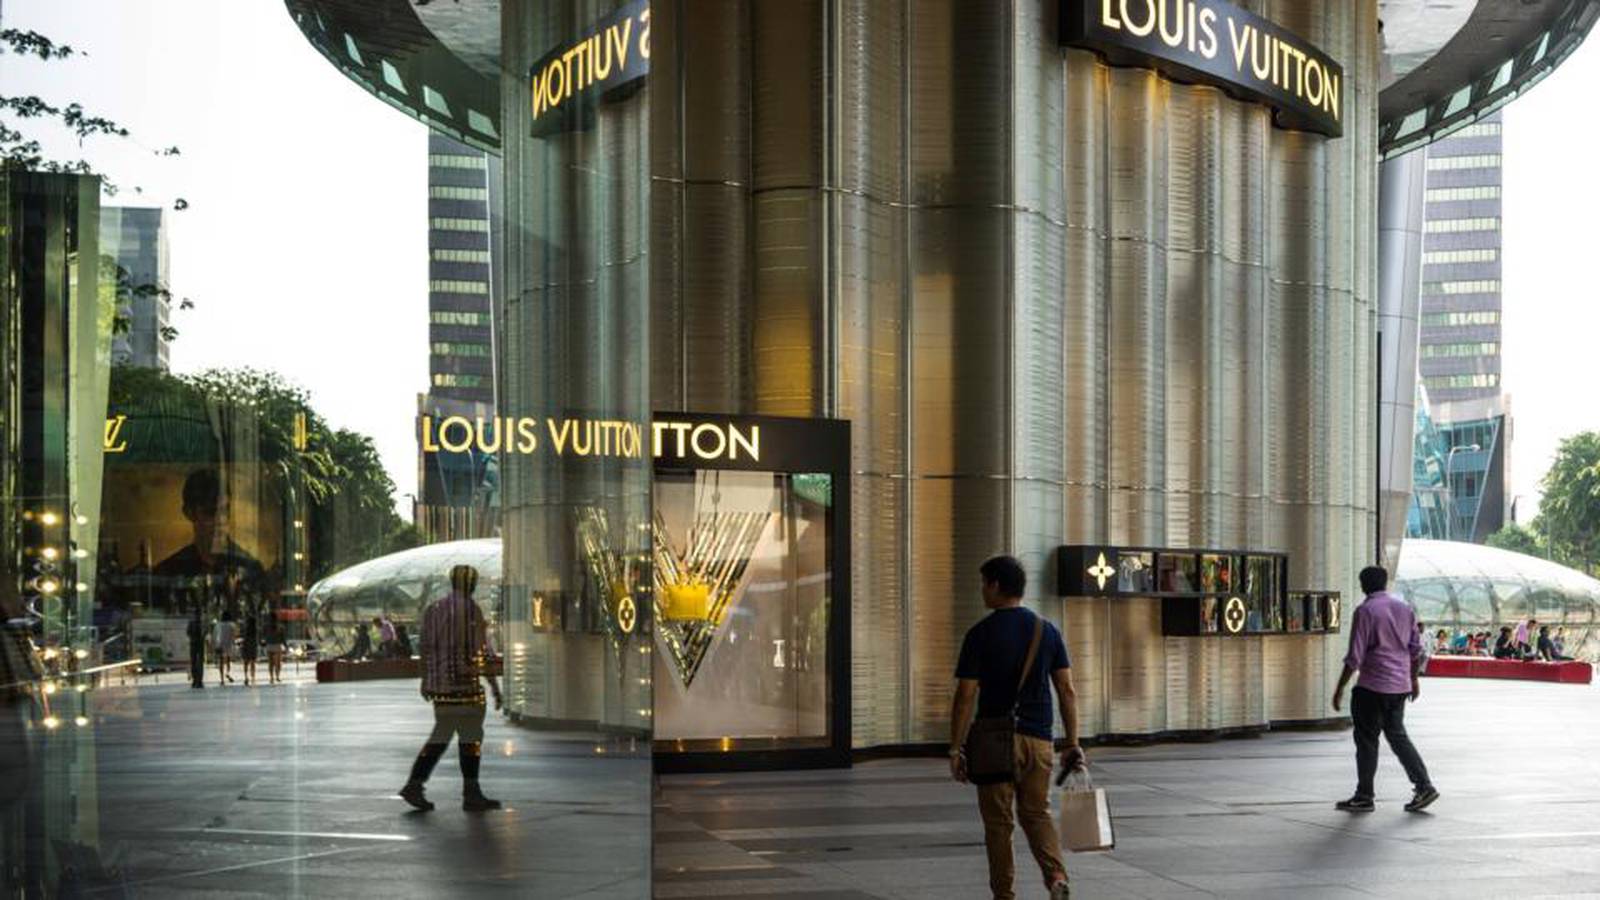 LVMH spirits sales beat forecasts in Q1, fashion disappoints